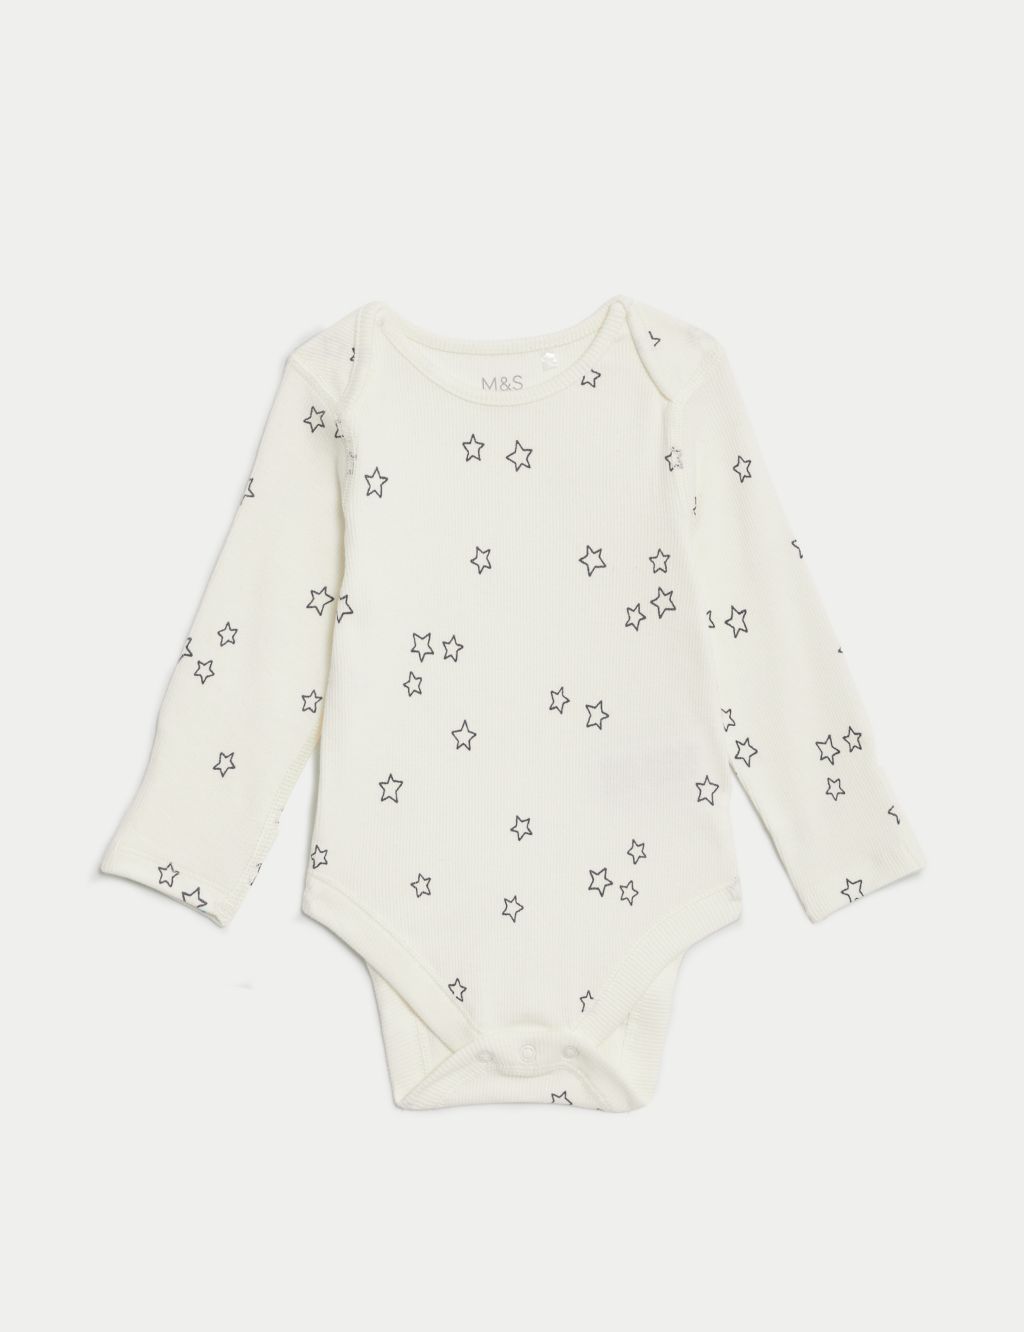 2pc Cotton Rich Stars Outfit (7lbs-1 Yrs) image 2